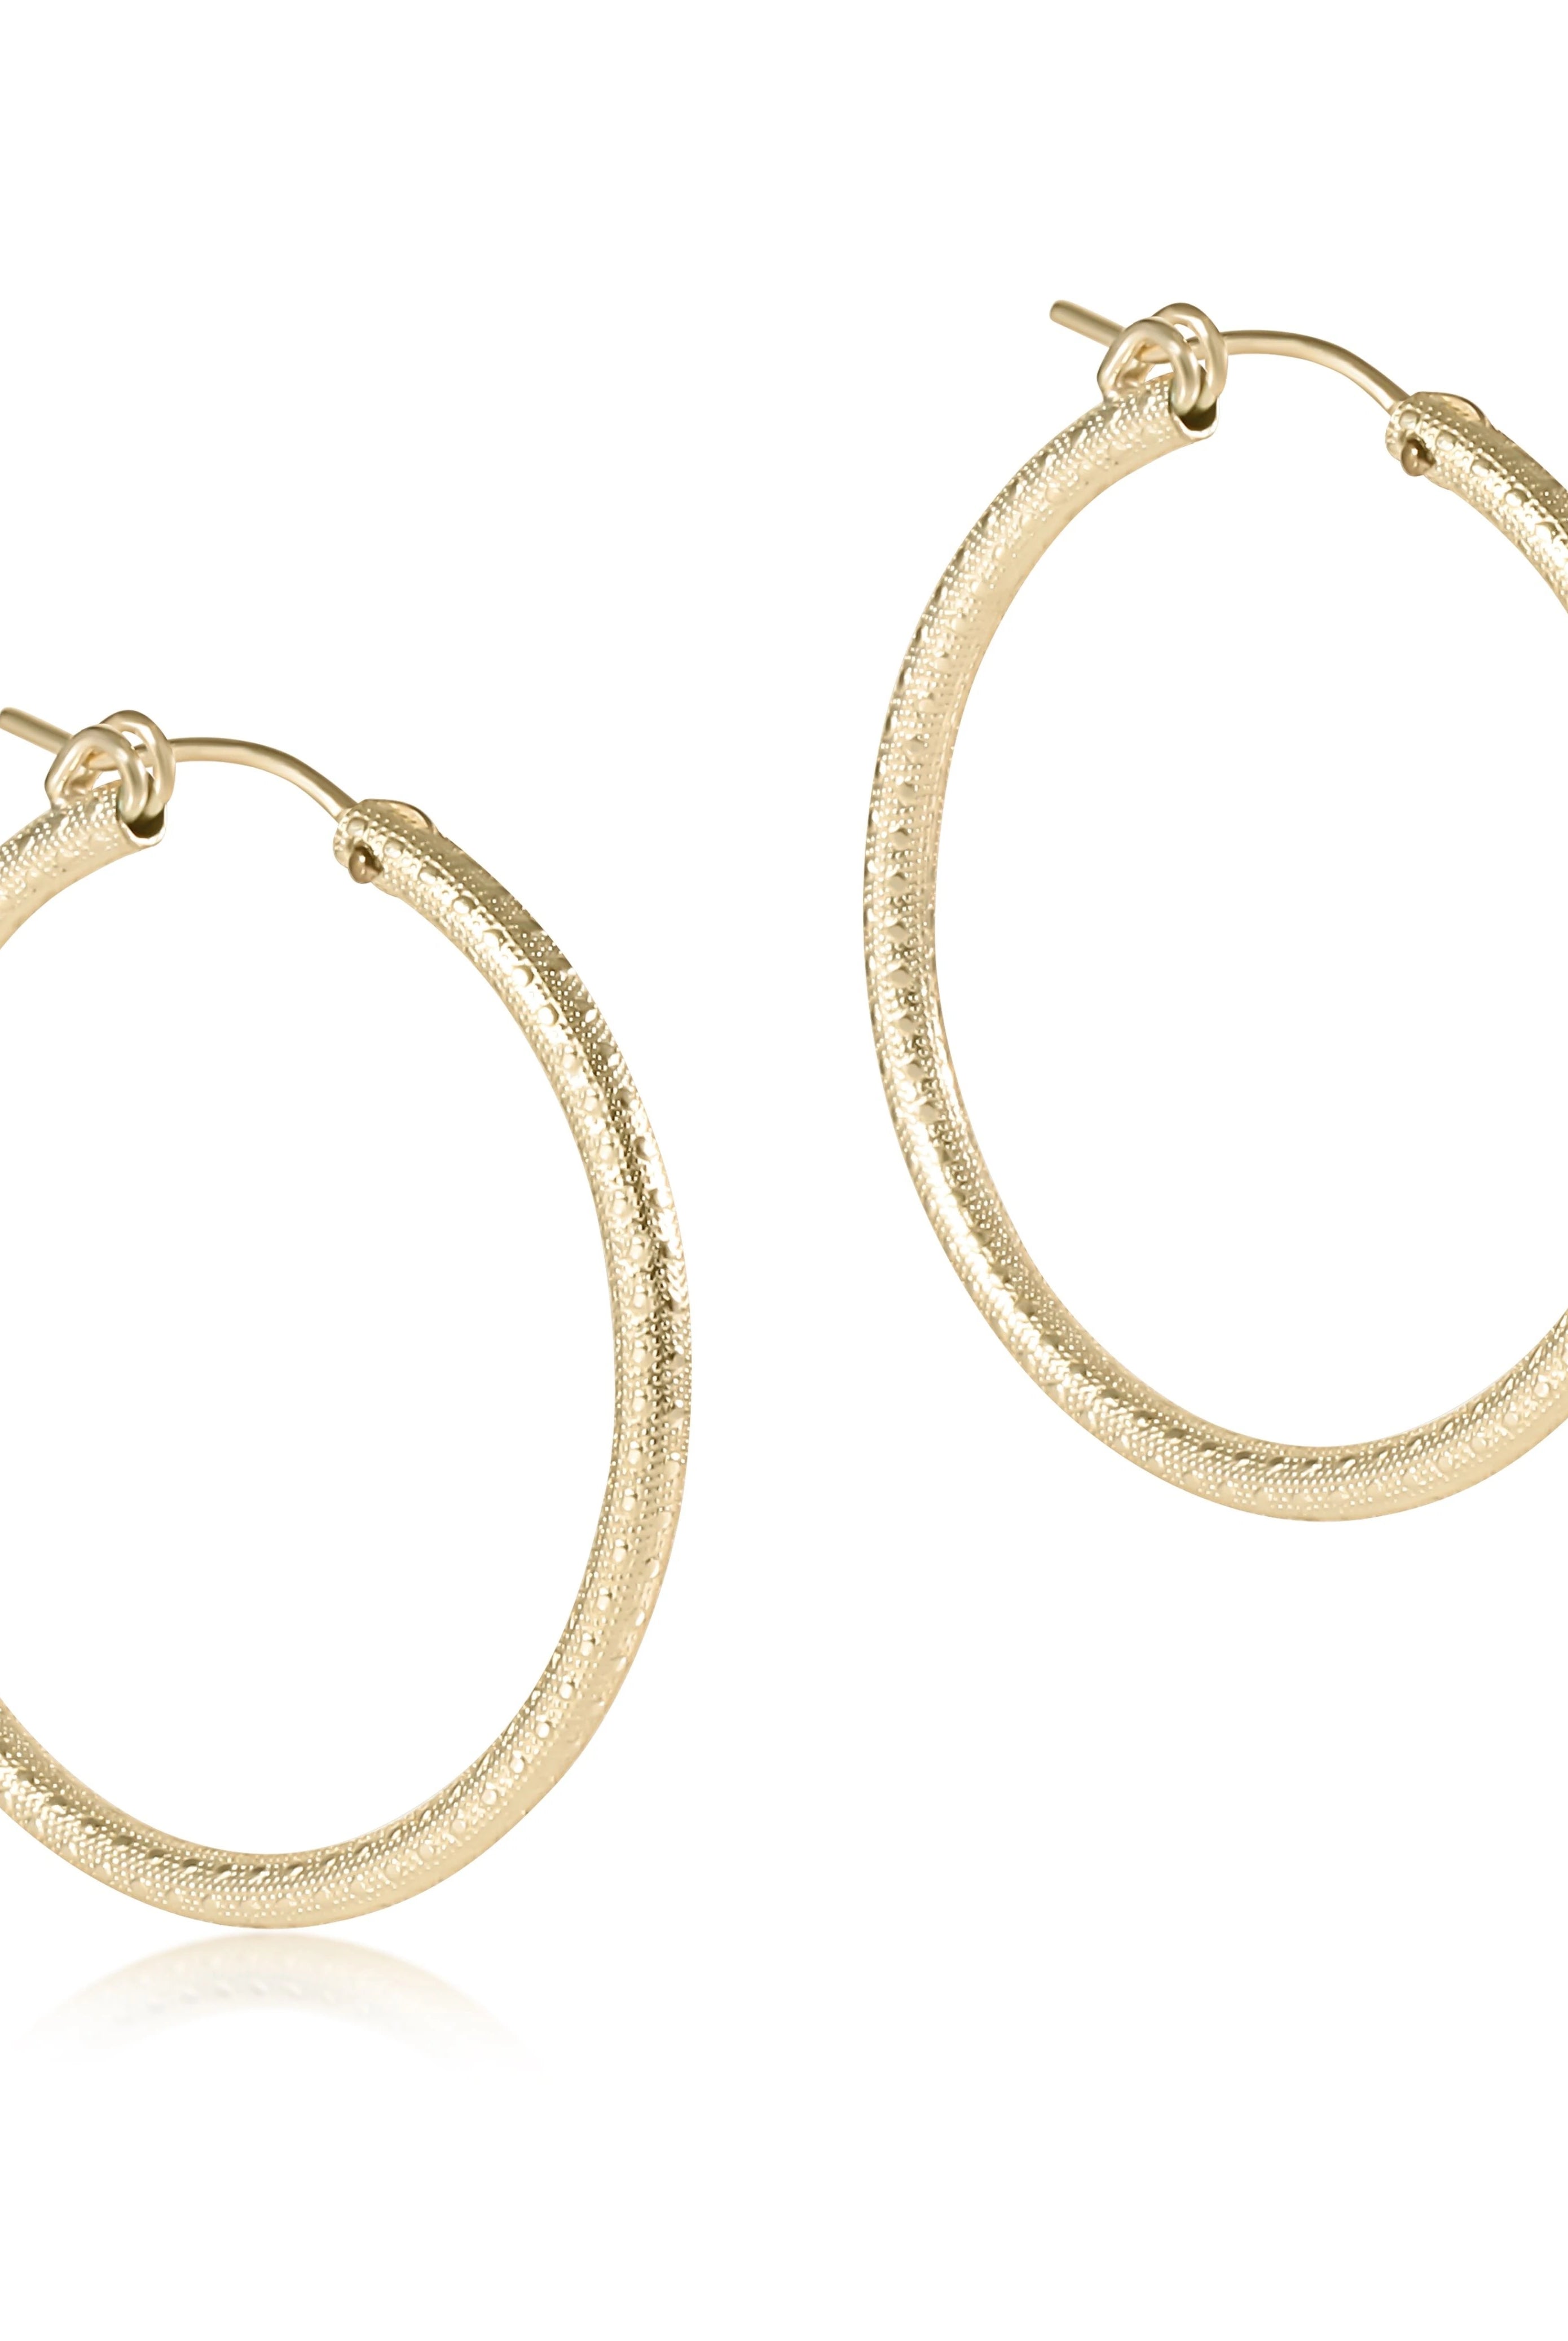 Round Gold Textured Hoop-Earrings-The Lovely Closet-The Lovely Closet, Women's Fashion Boutique in Alexandria, KY